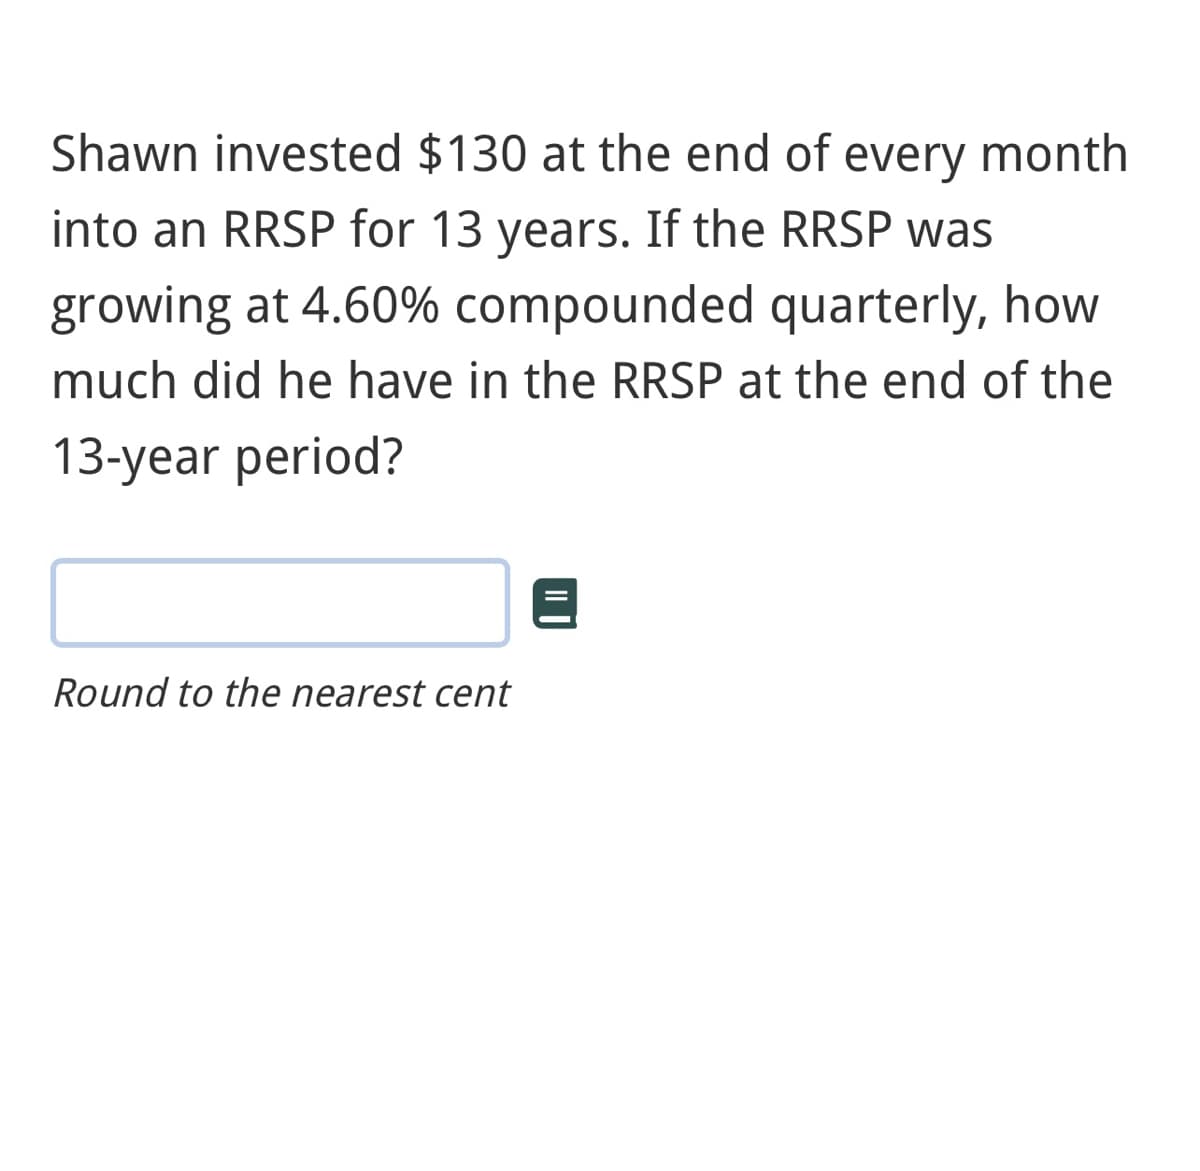 Shawn invested $130 at the end of every month
into an RRSP for 13 years. If the RRSP was
growing at 4.60% compounded quarterly, how
much did he have in the RRSP at the end of the
13-year period?
Round to the nearest cent